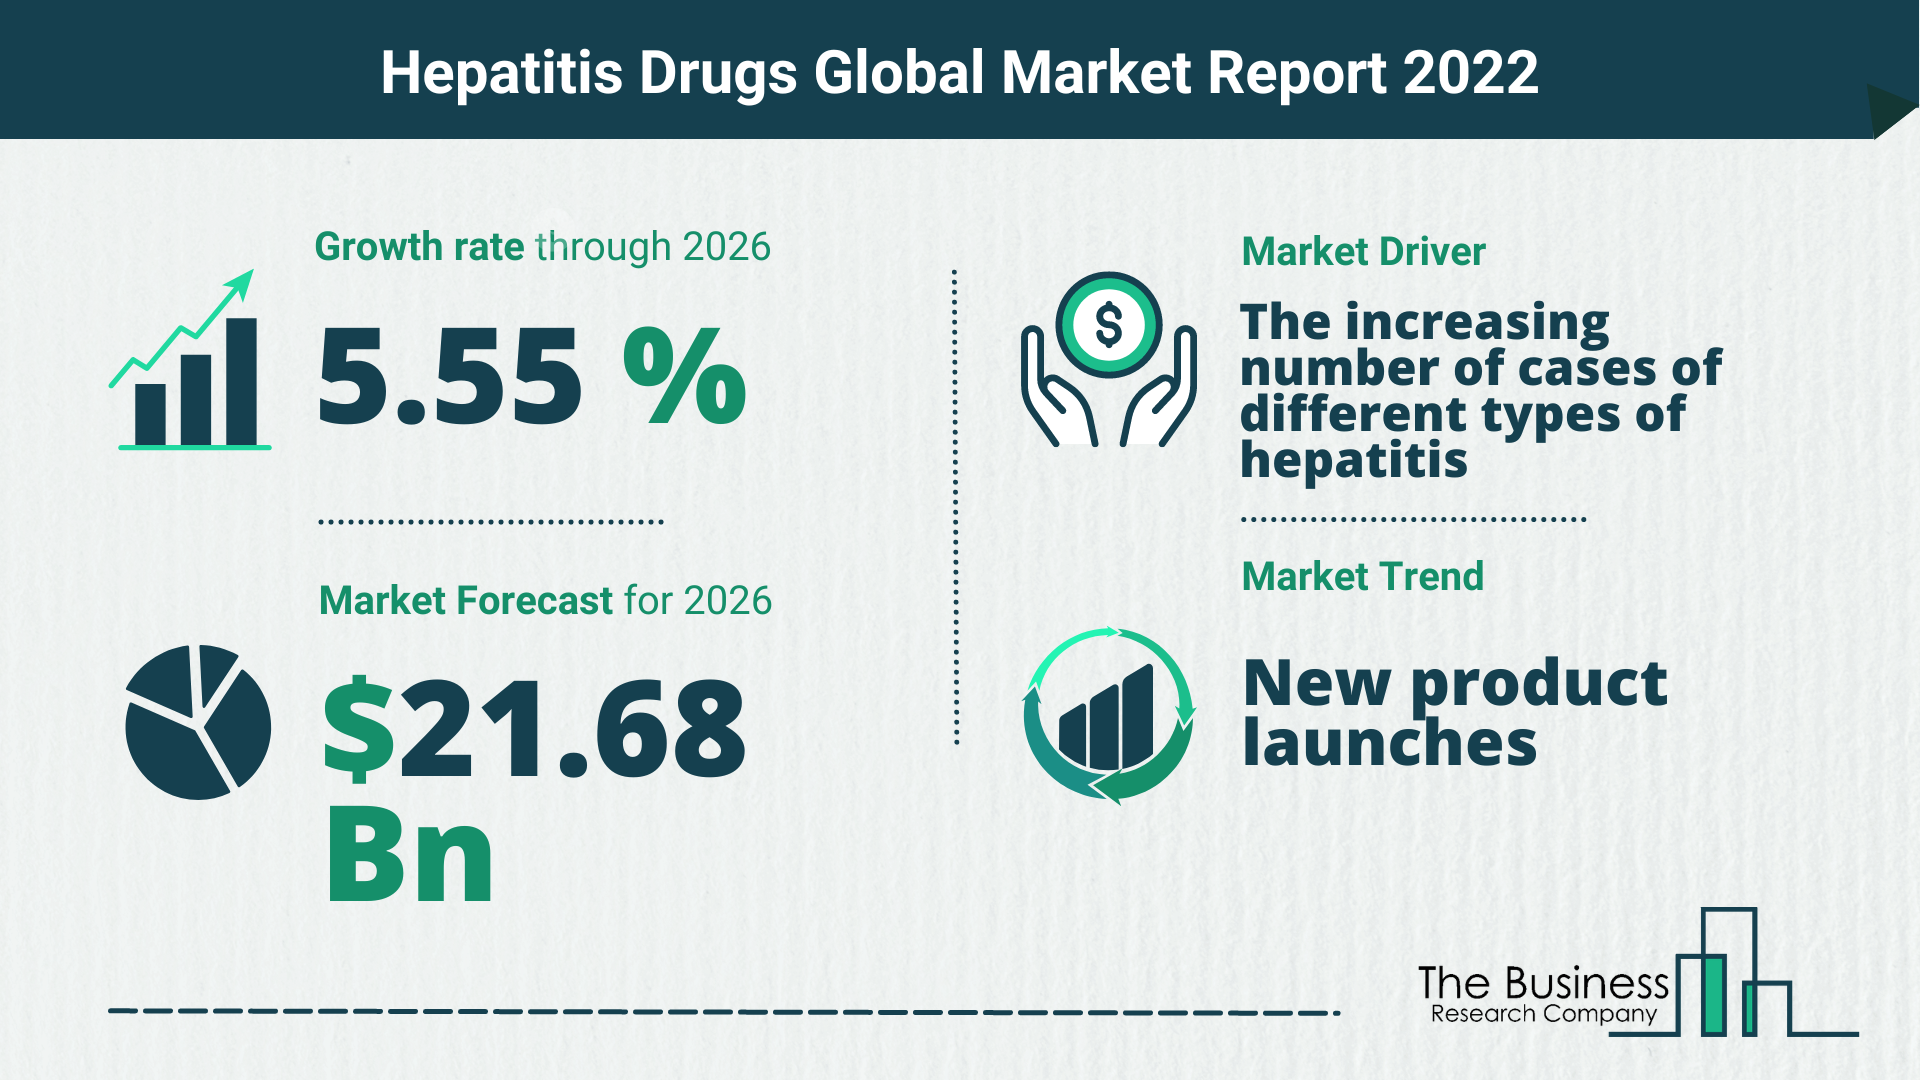 Latest Hepatitis Drugs Market Growth Study 2022-2026 By The Business Research Company